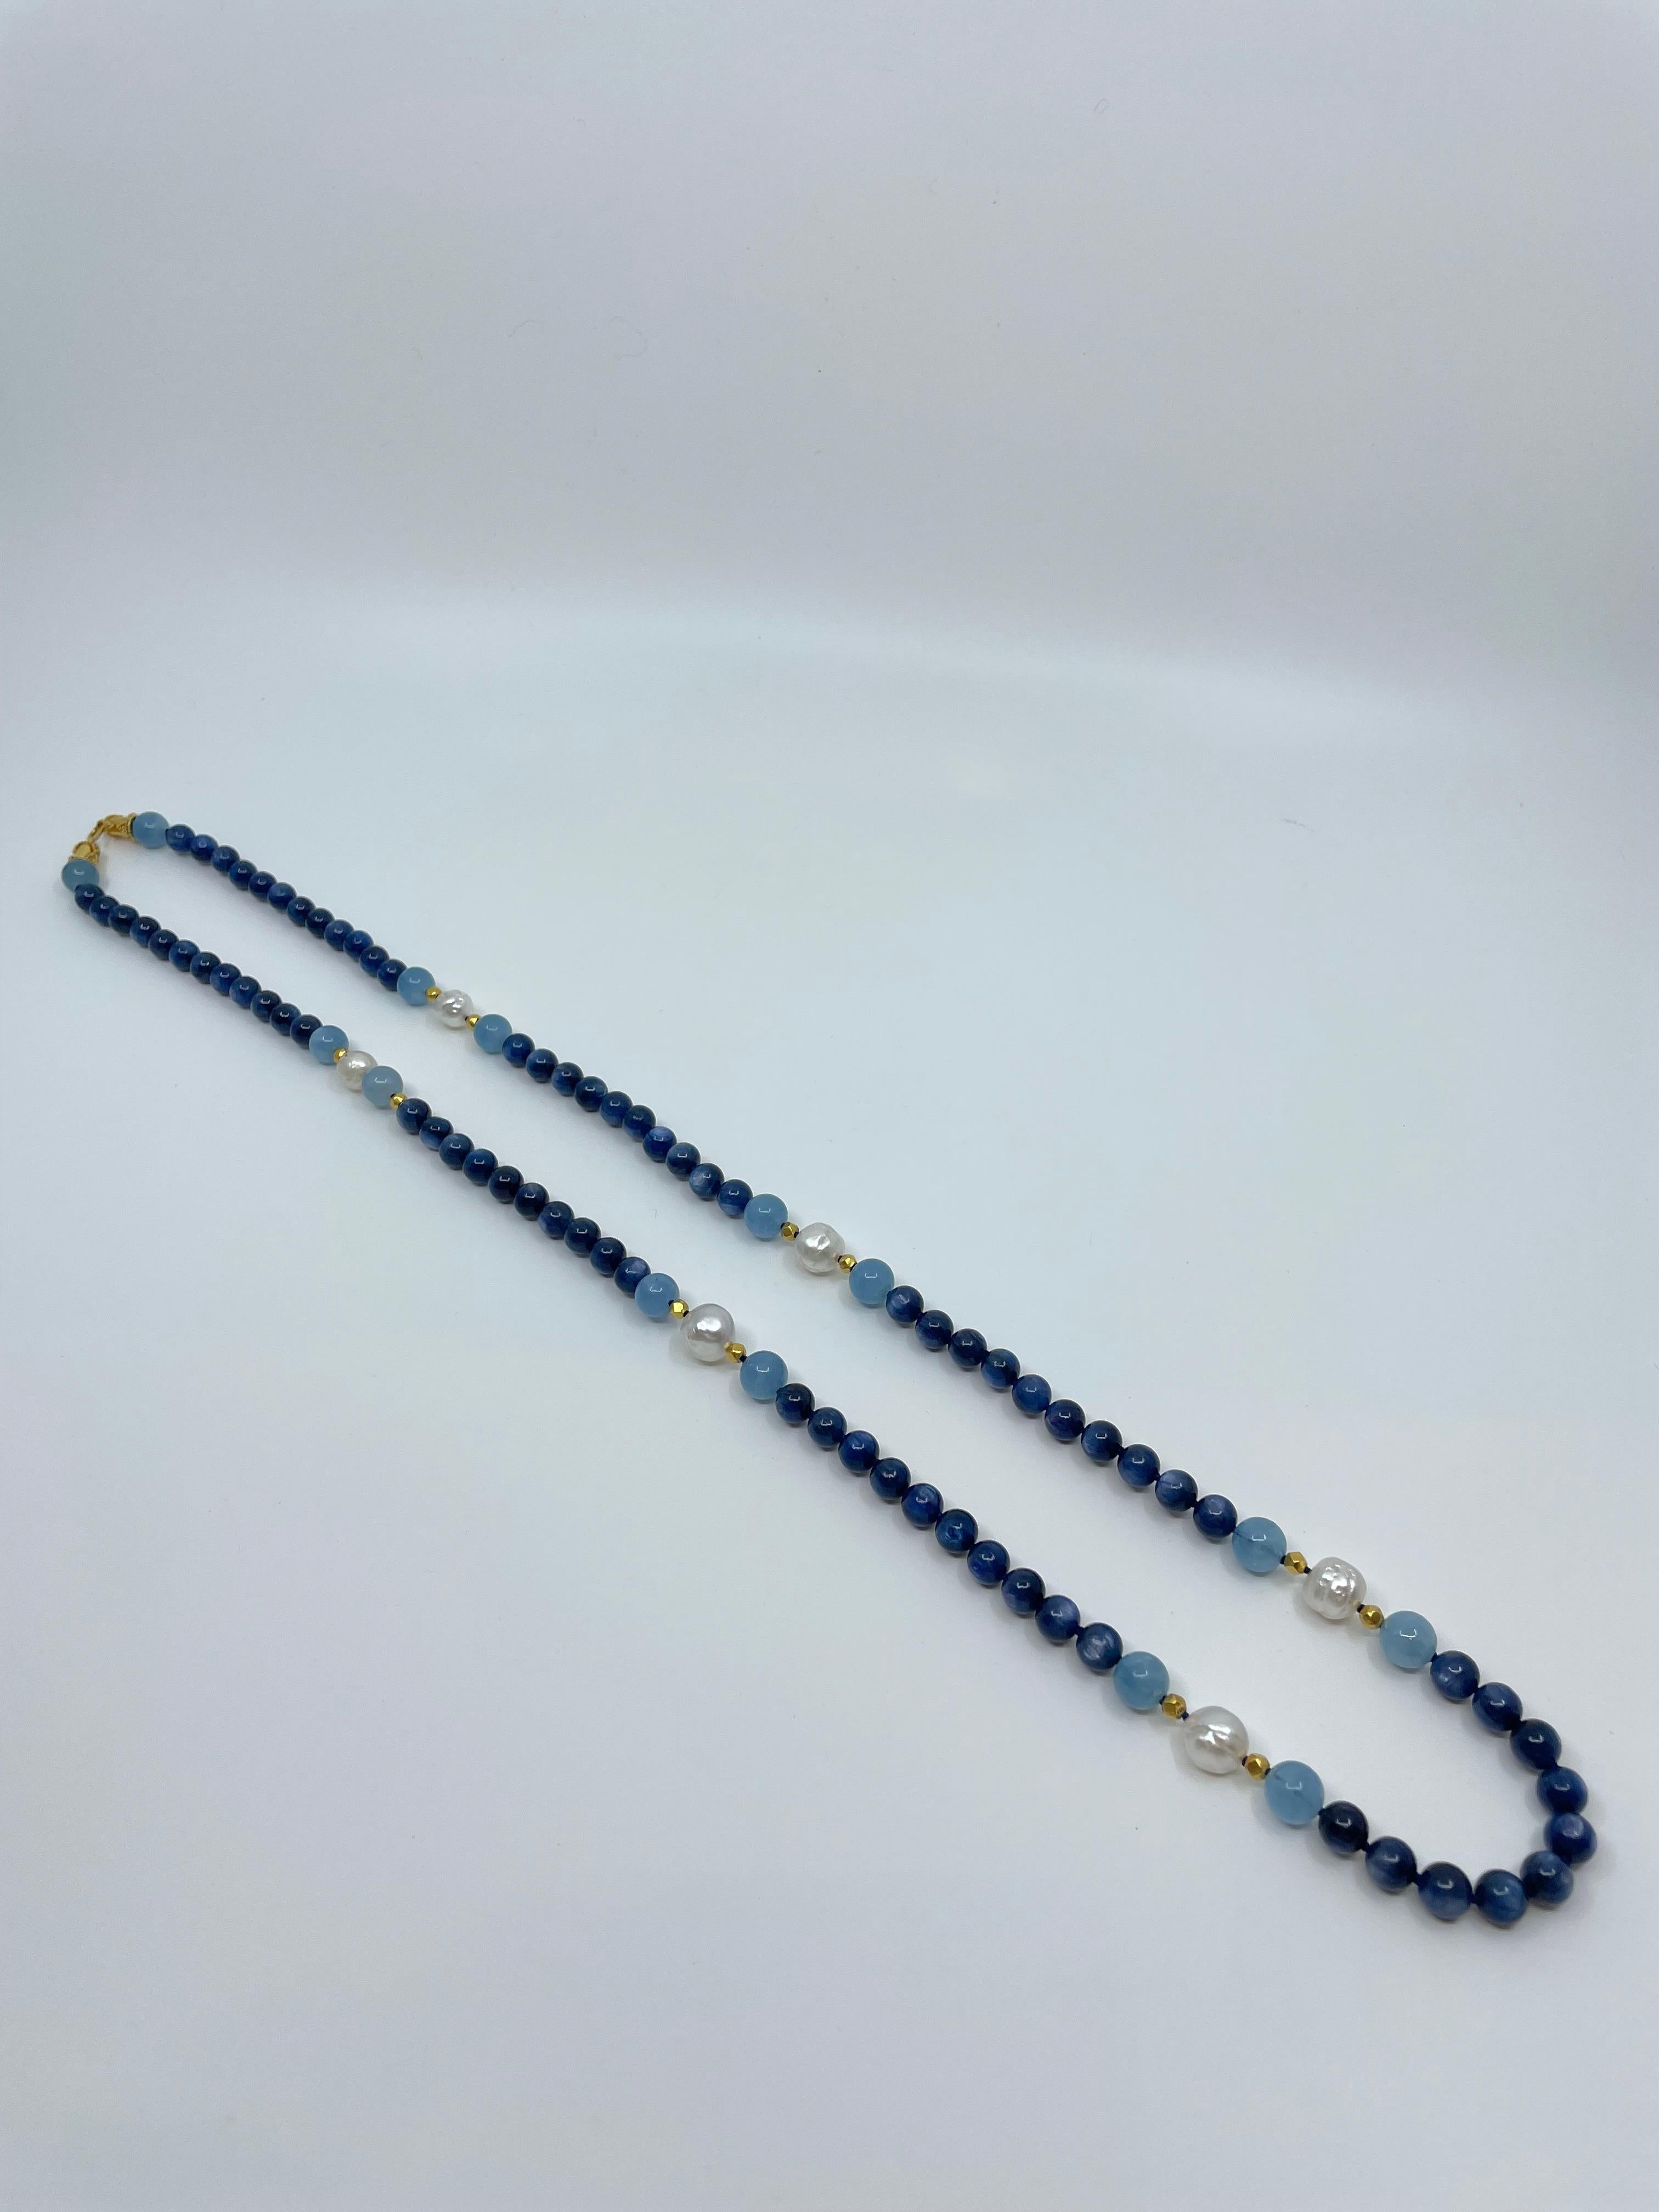 Long Necklace with Kyanite, Aquamarine, South Sea Pearls & 18K Solid Gold Beads For Sale 8